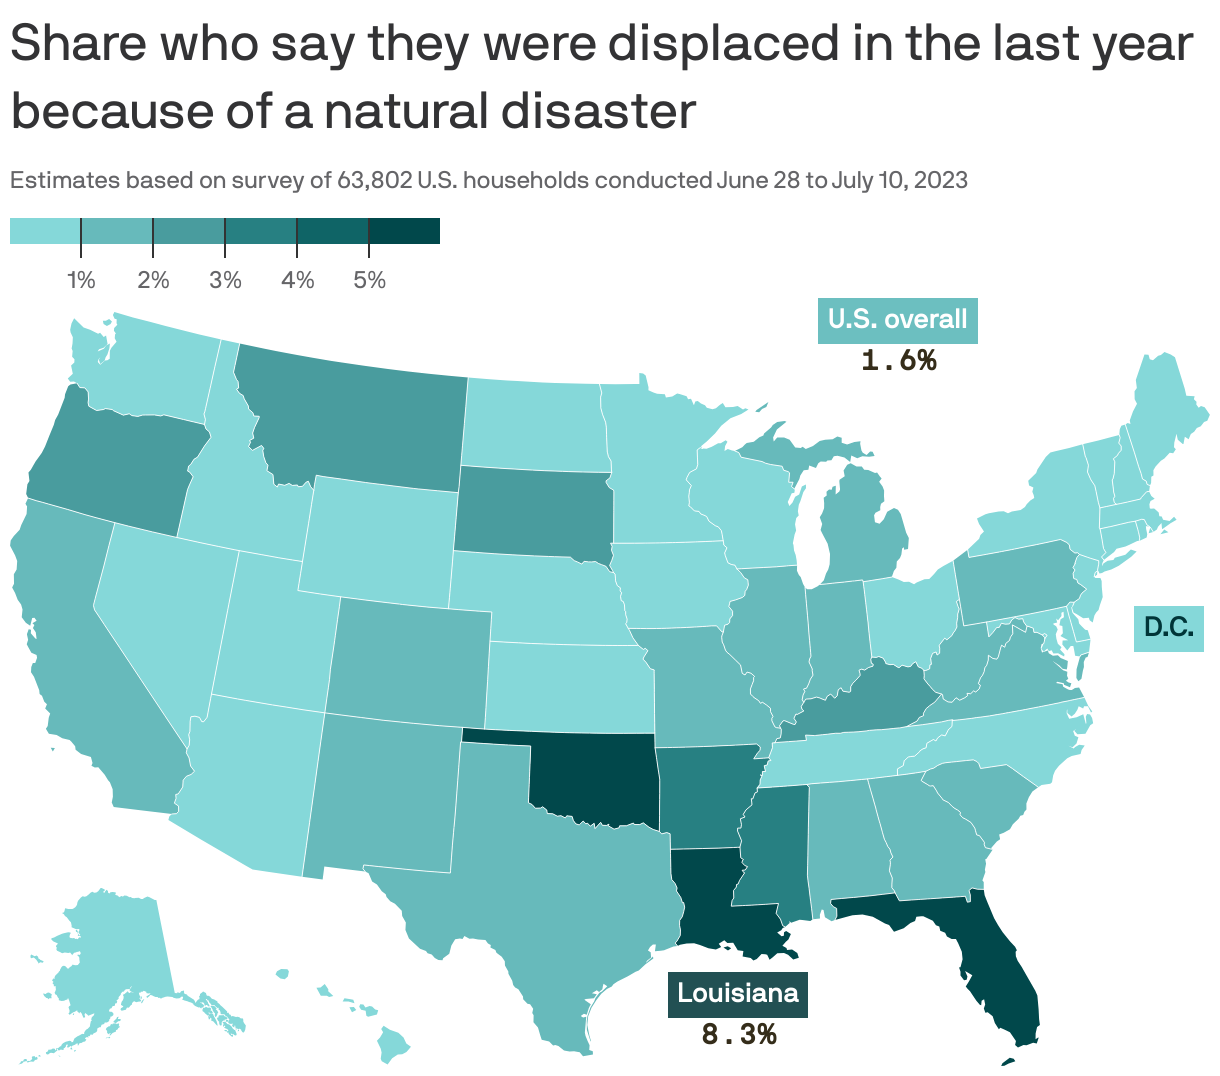 Share who say they were displaced in the last year because of a natural disaster